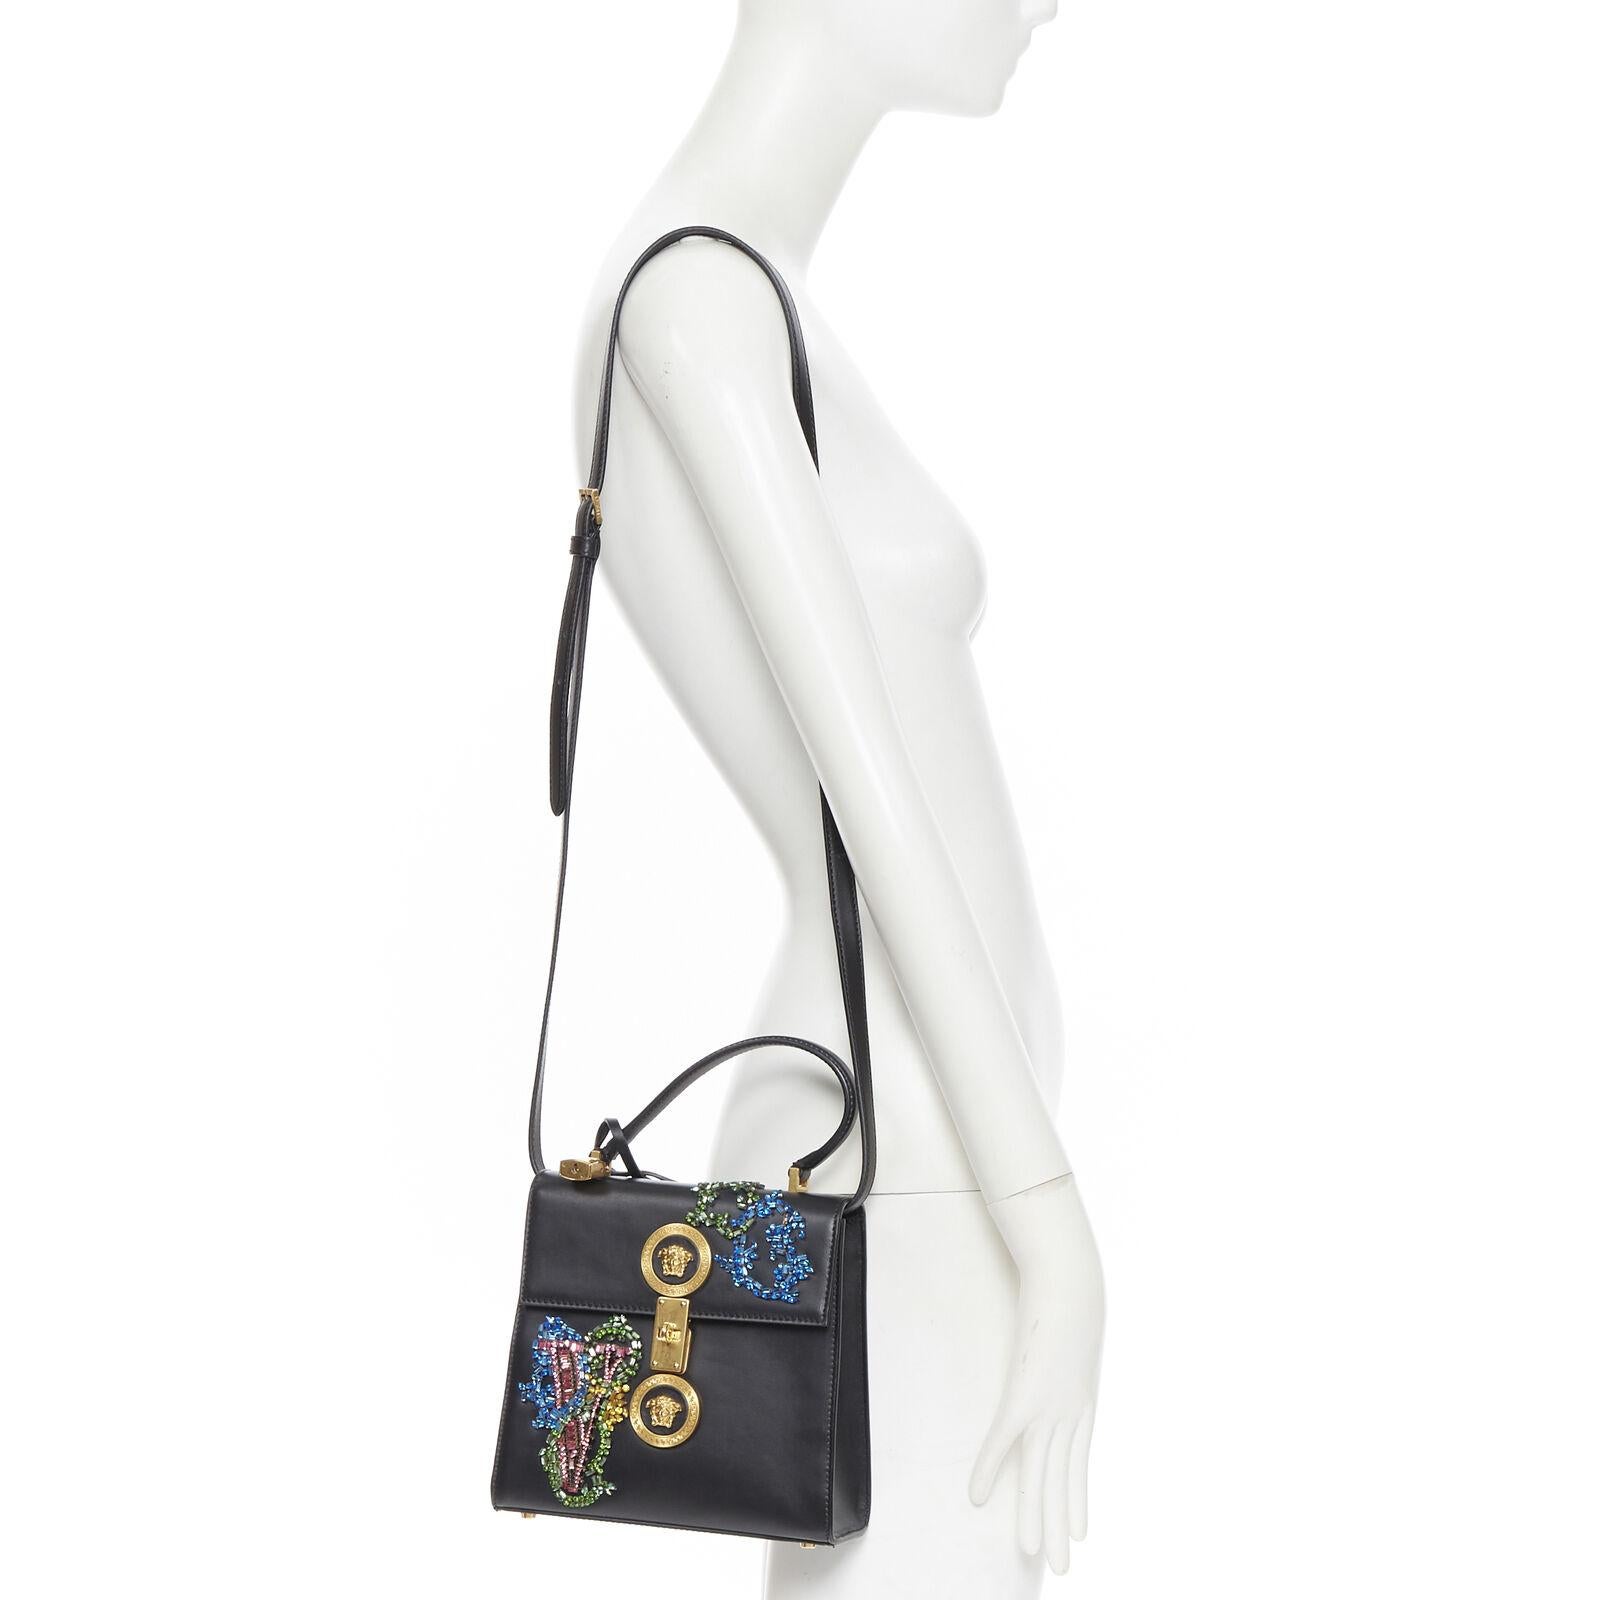 VERSACE

Icon Flap black baroque Swarovski crystal embellished top handle bag
Brand: Versace
Designer: Donatella Versace
Collection: 2019
Model Name / Style: Icon
Material: Leather
Color: Black
Pattern: Solid
Closure: Turnlock
Lining material: